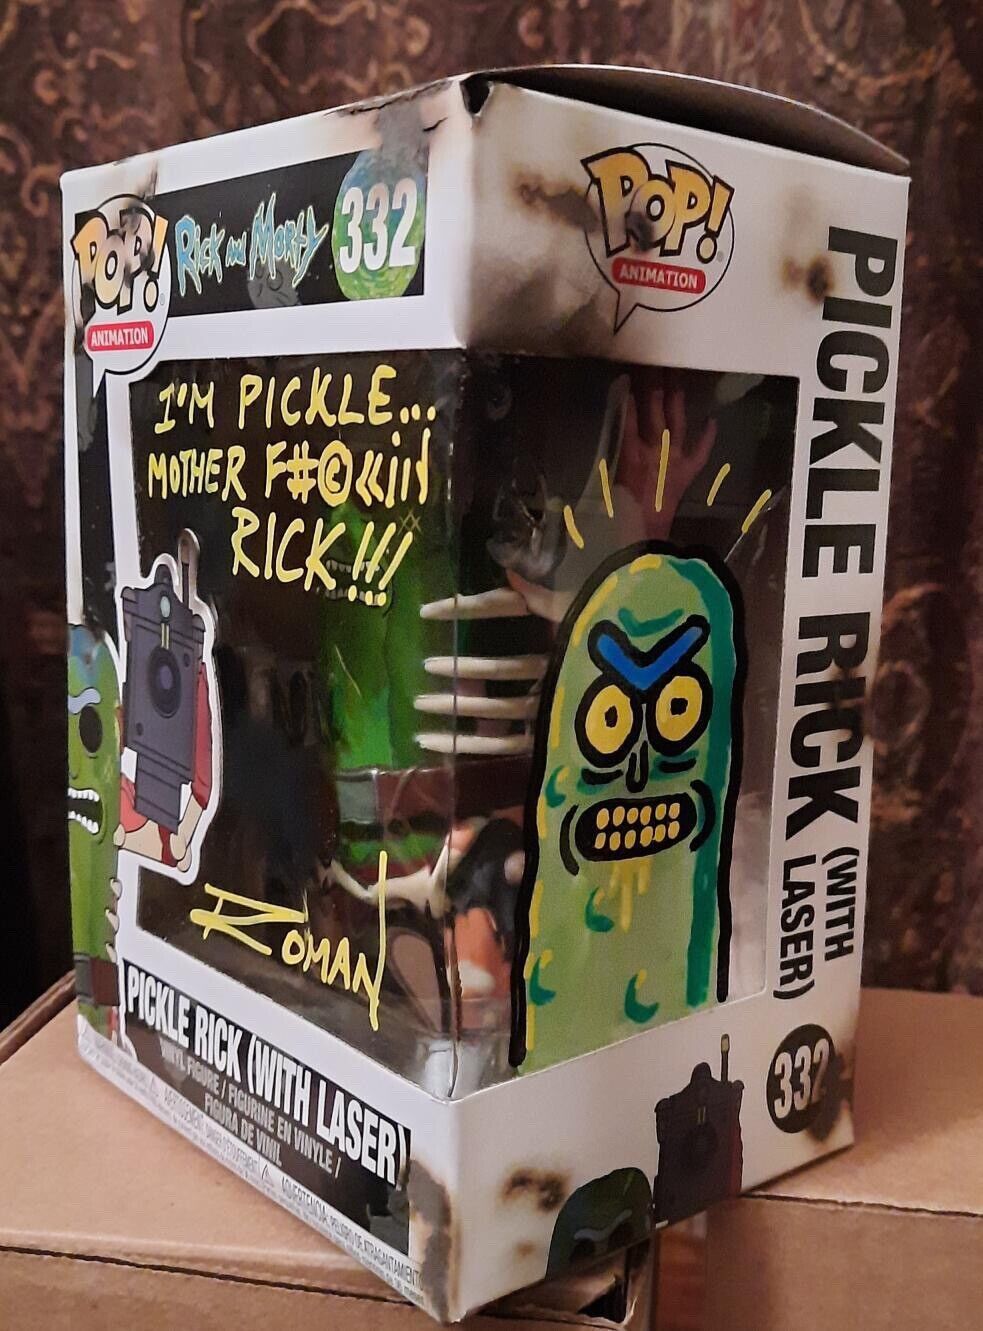 David Angelo Roman Signed Sketched Funko Pop #332 Pickle Rick with LAZER BURNS